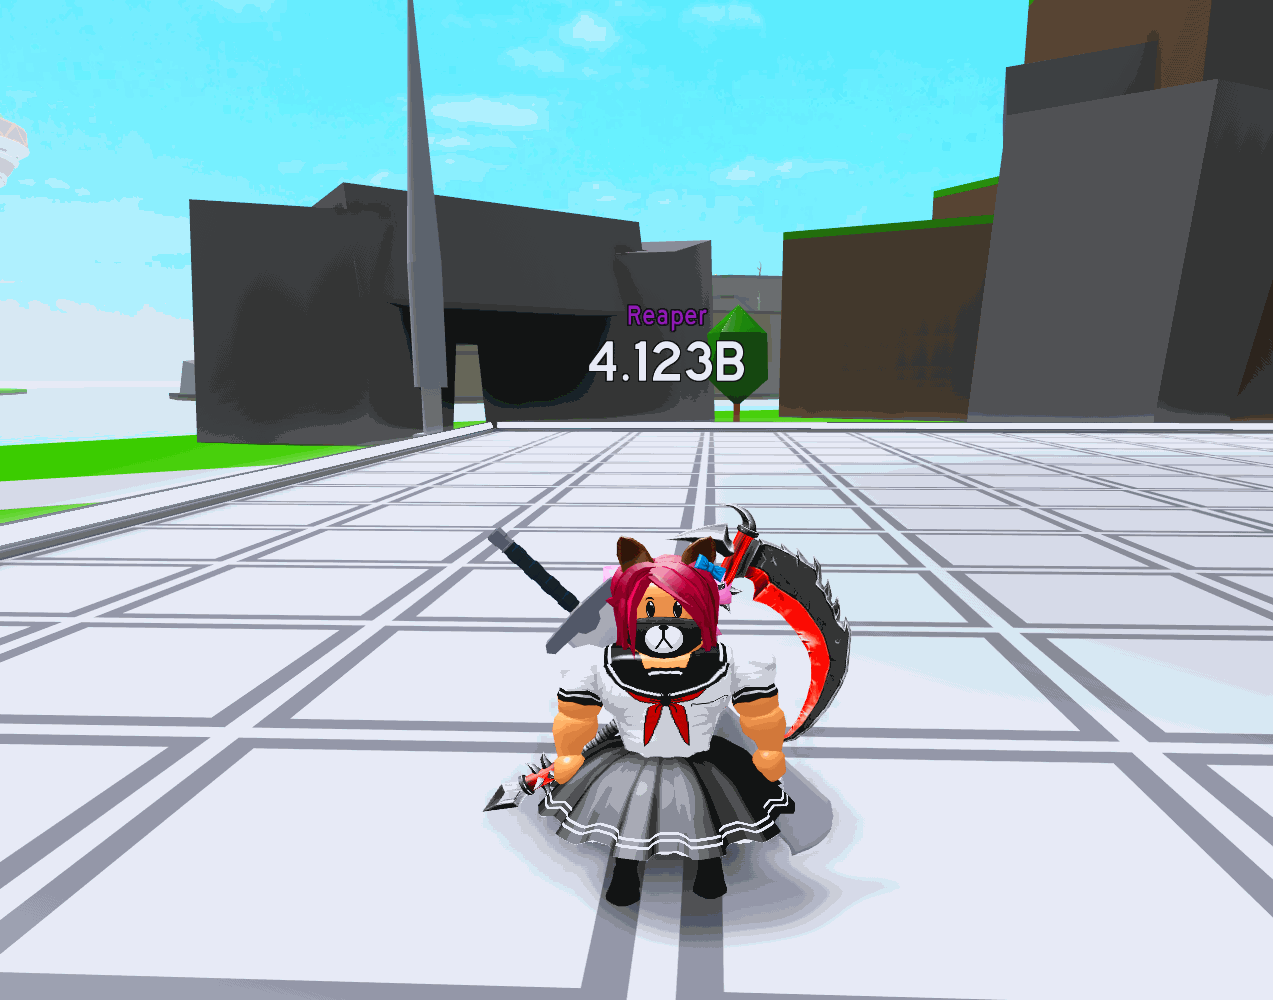 This SECRET Power Is OP In Roblox Anime Fighting Simulator X